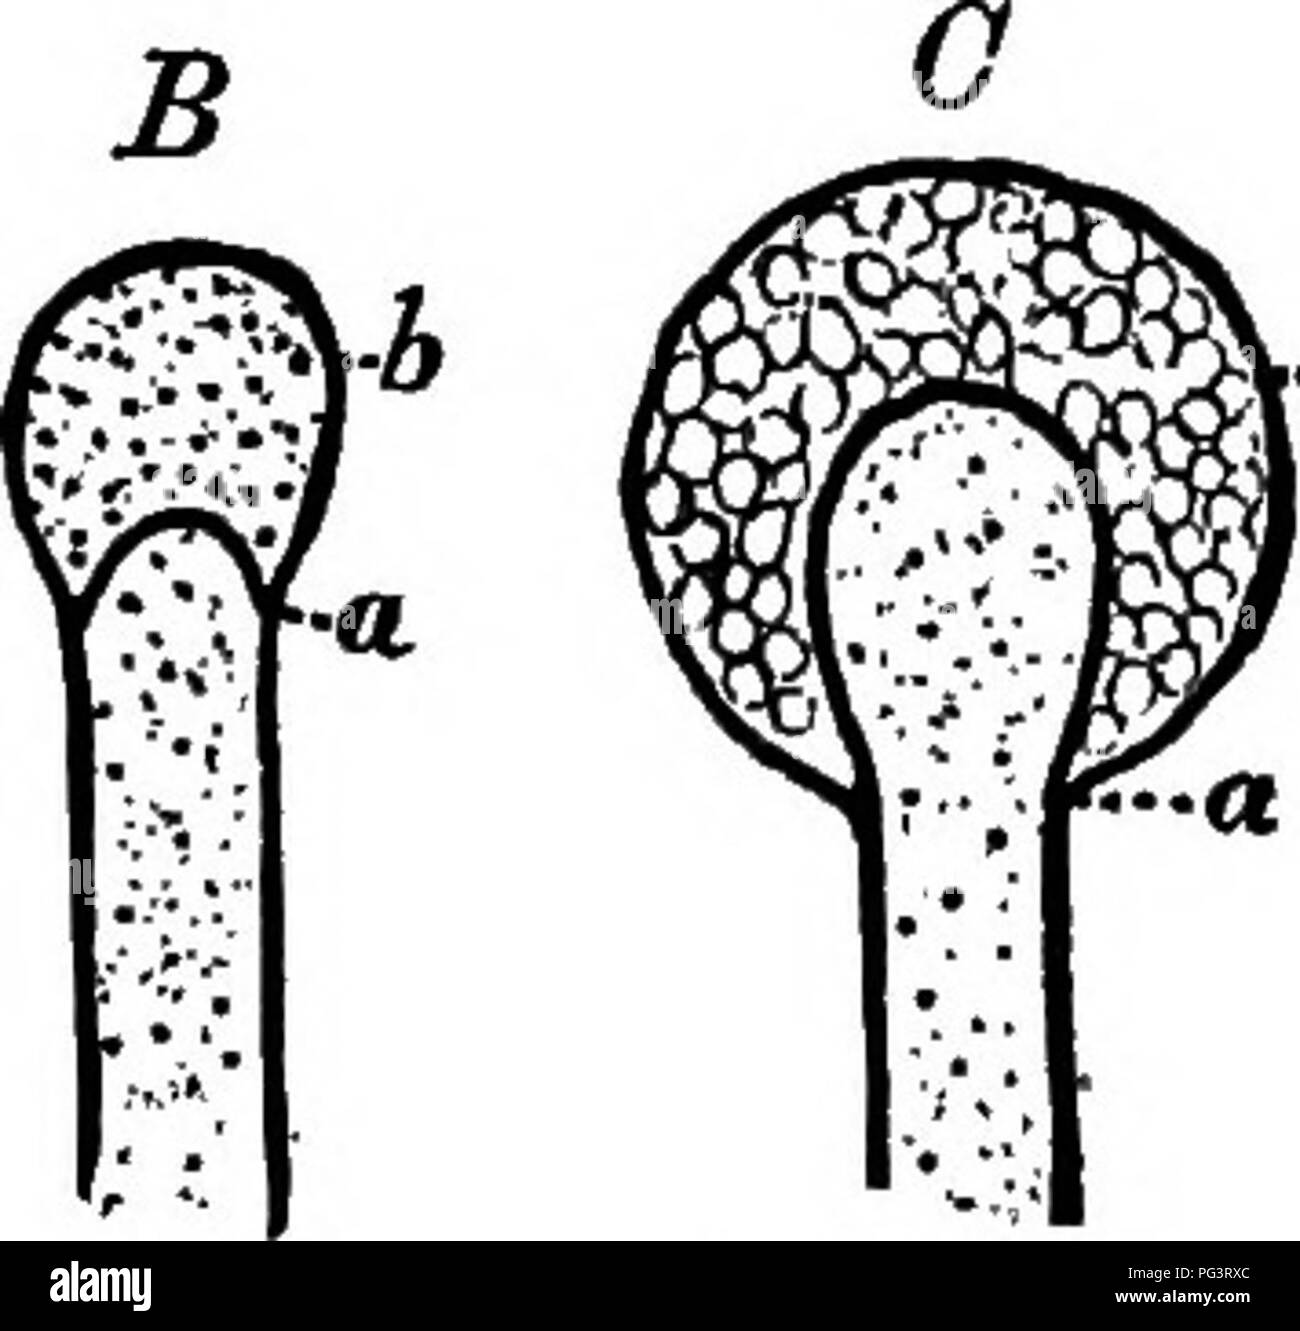 . The essentials of botany. Botany. 126 BOTANY. pastry, etc. (Mucor mucedo), is as follows: The vertical hyphse, which are filled with protoplasm, become enlarged at the top, and in each a transverse partition forms {A, a, Fig. 58), the portion above the partition {b) becomes larger, and, at the same time, the transverse partition arches up {B, a), finally appearing like an extension of the hypha, then called the columella {G, a). The protoplasm in the enlarged terminal cell (S) divides into a large number of minute masses, each of which surrounds itself with a cell- A â a. Fig. 58.âDiagrams s Stock Photo